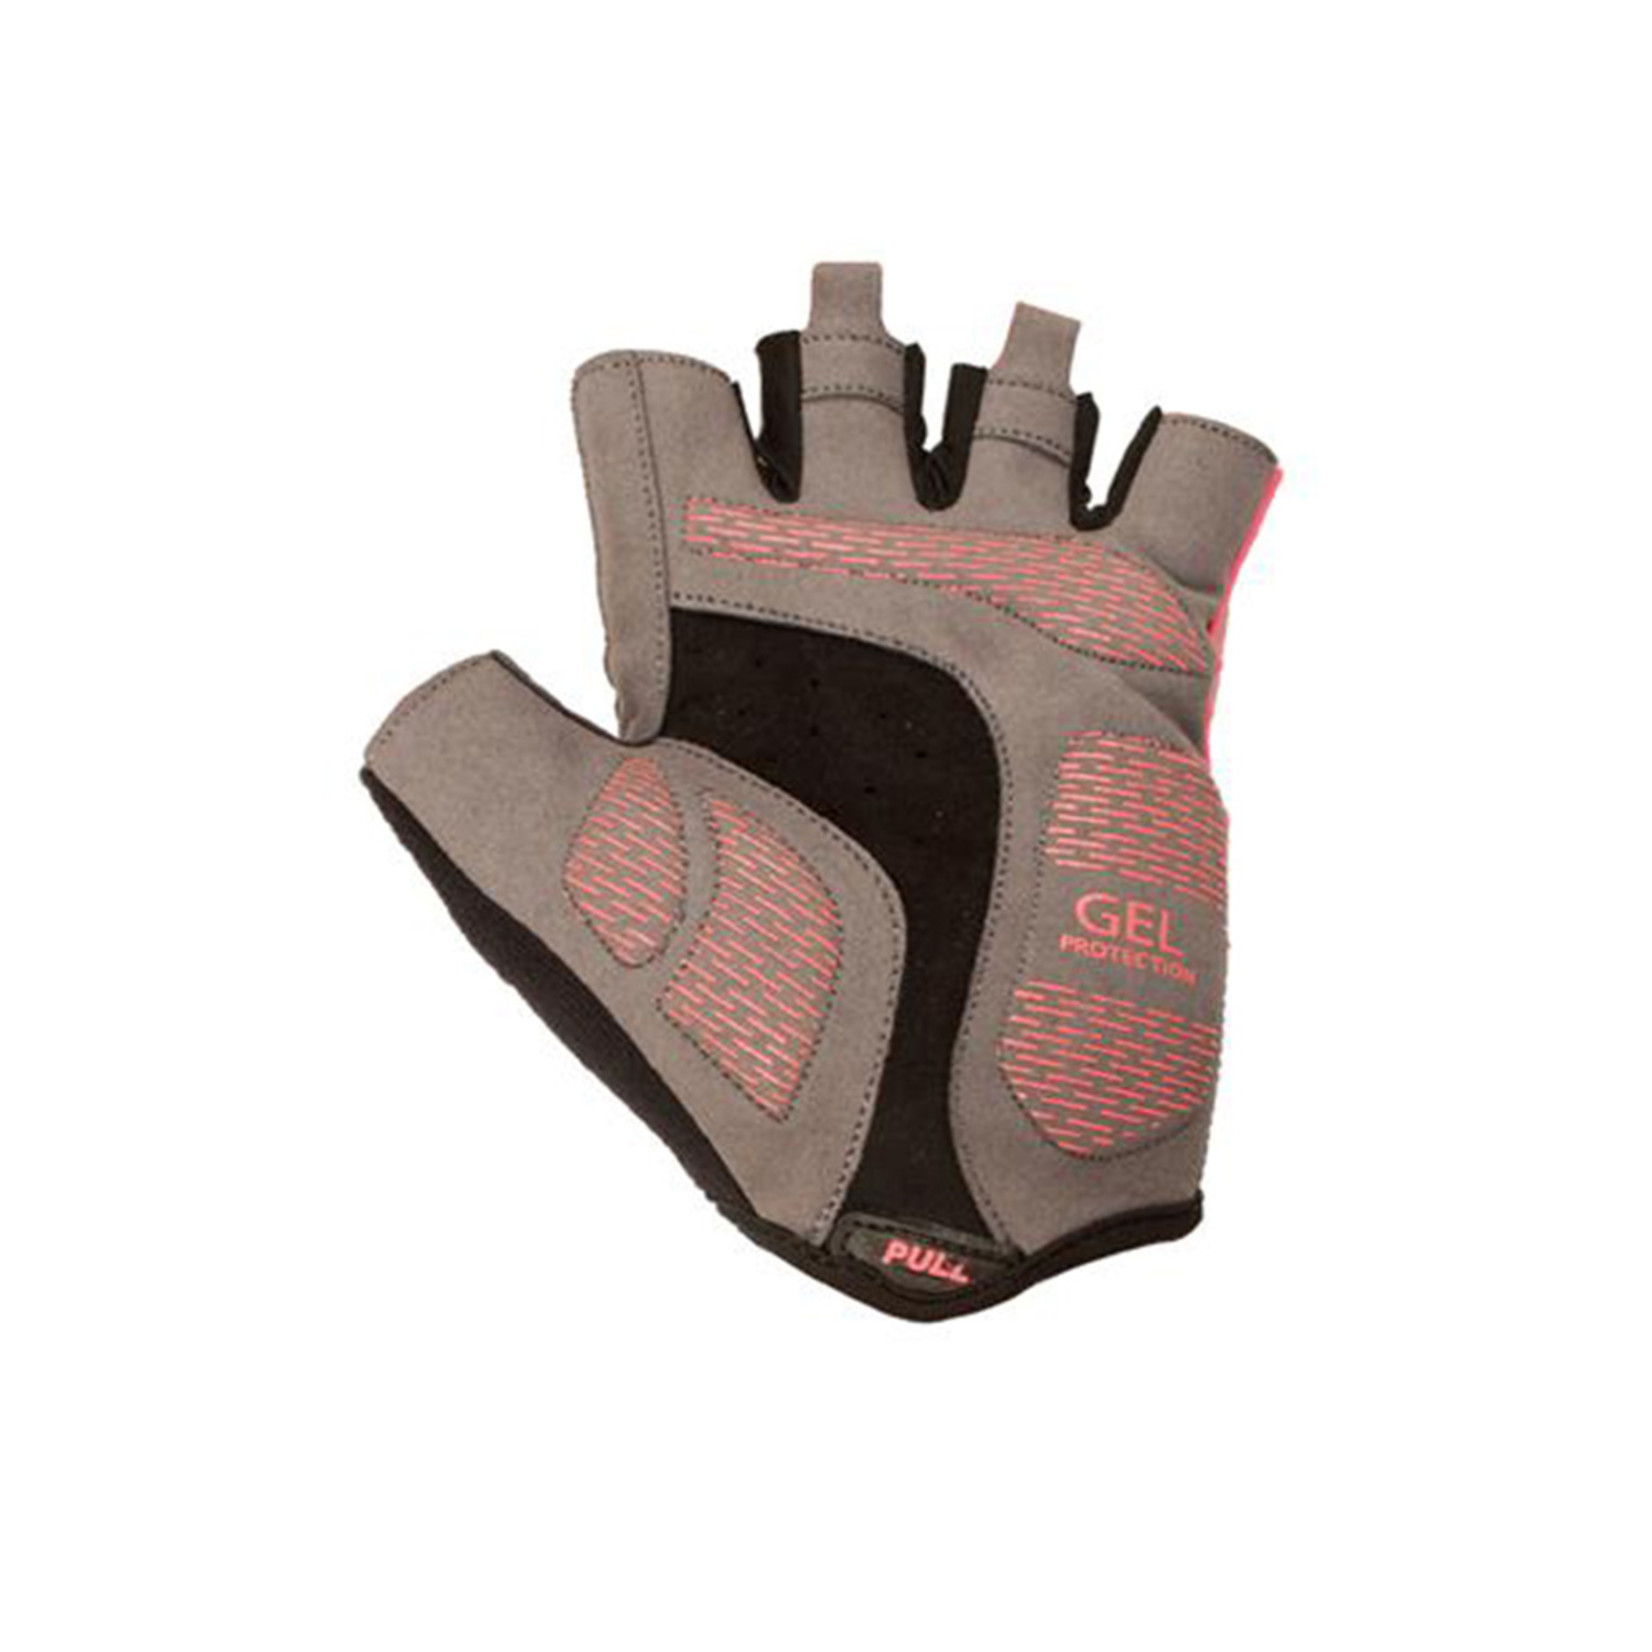 Azur Azur Bike/Cycling Glove - Synthetic Plam - S60 Series - Peach - Small